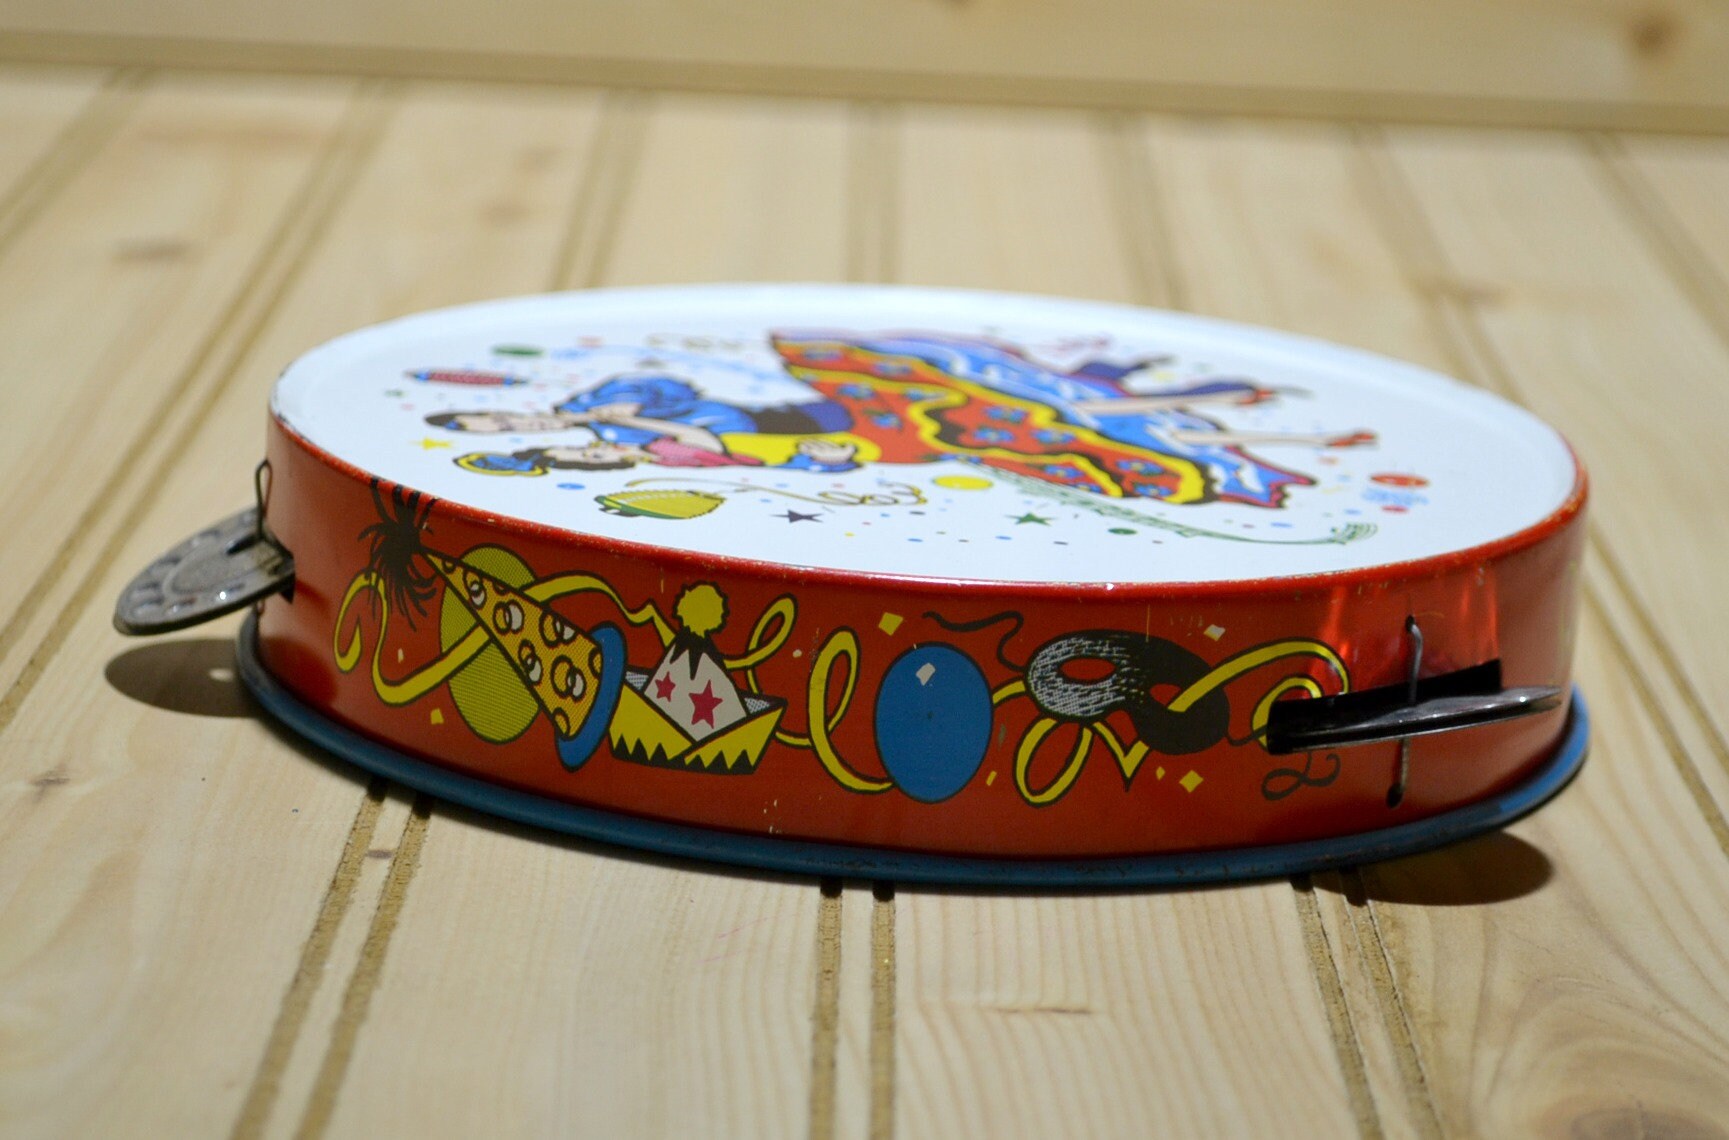 Vintage US Metal Toy Mfg Co Litho Musical Tin Tambourine Toy Gypsy Mult Color 